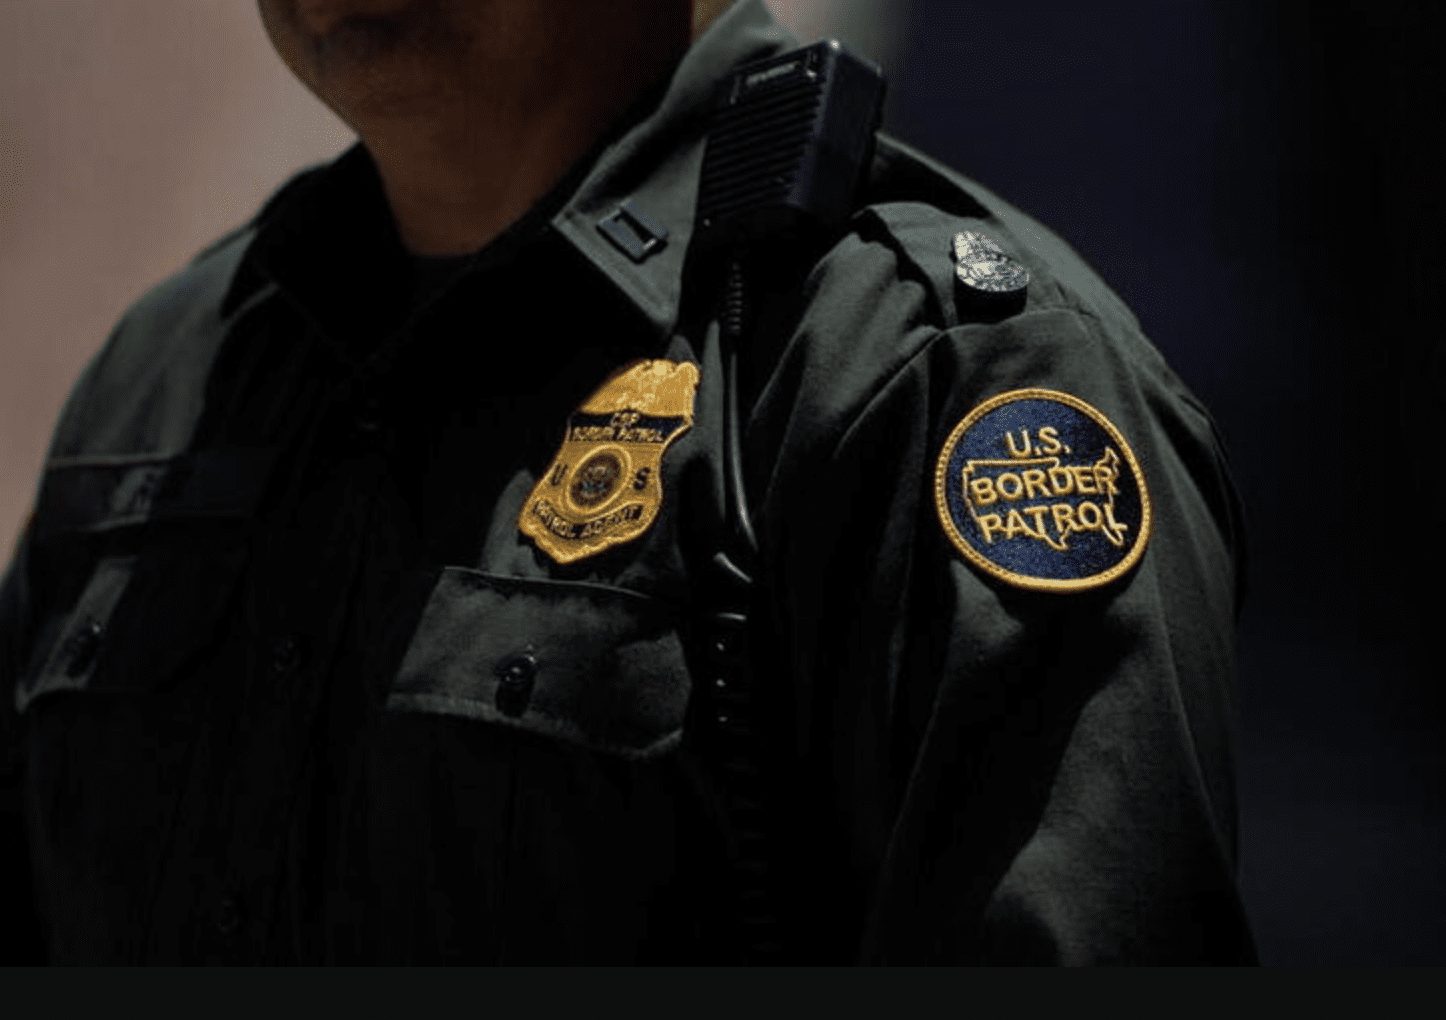 Three Men Connected to Child Sex Abuse Cases Arrested at Border